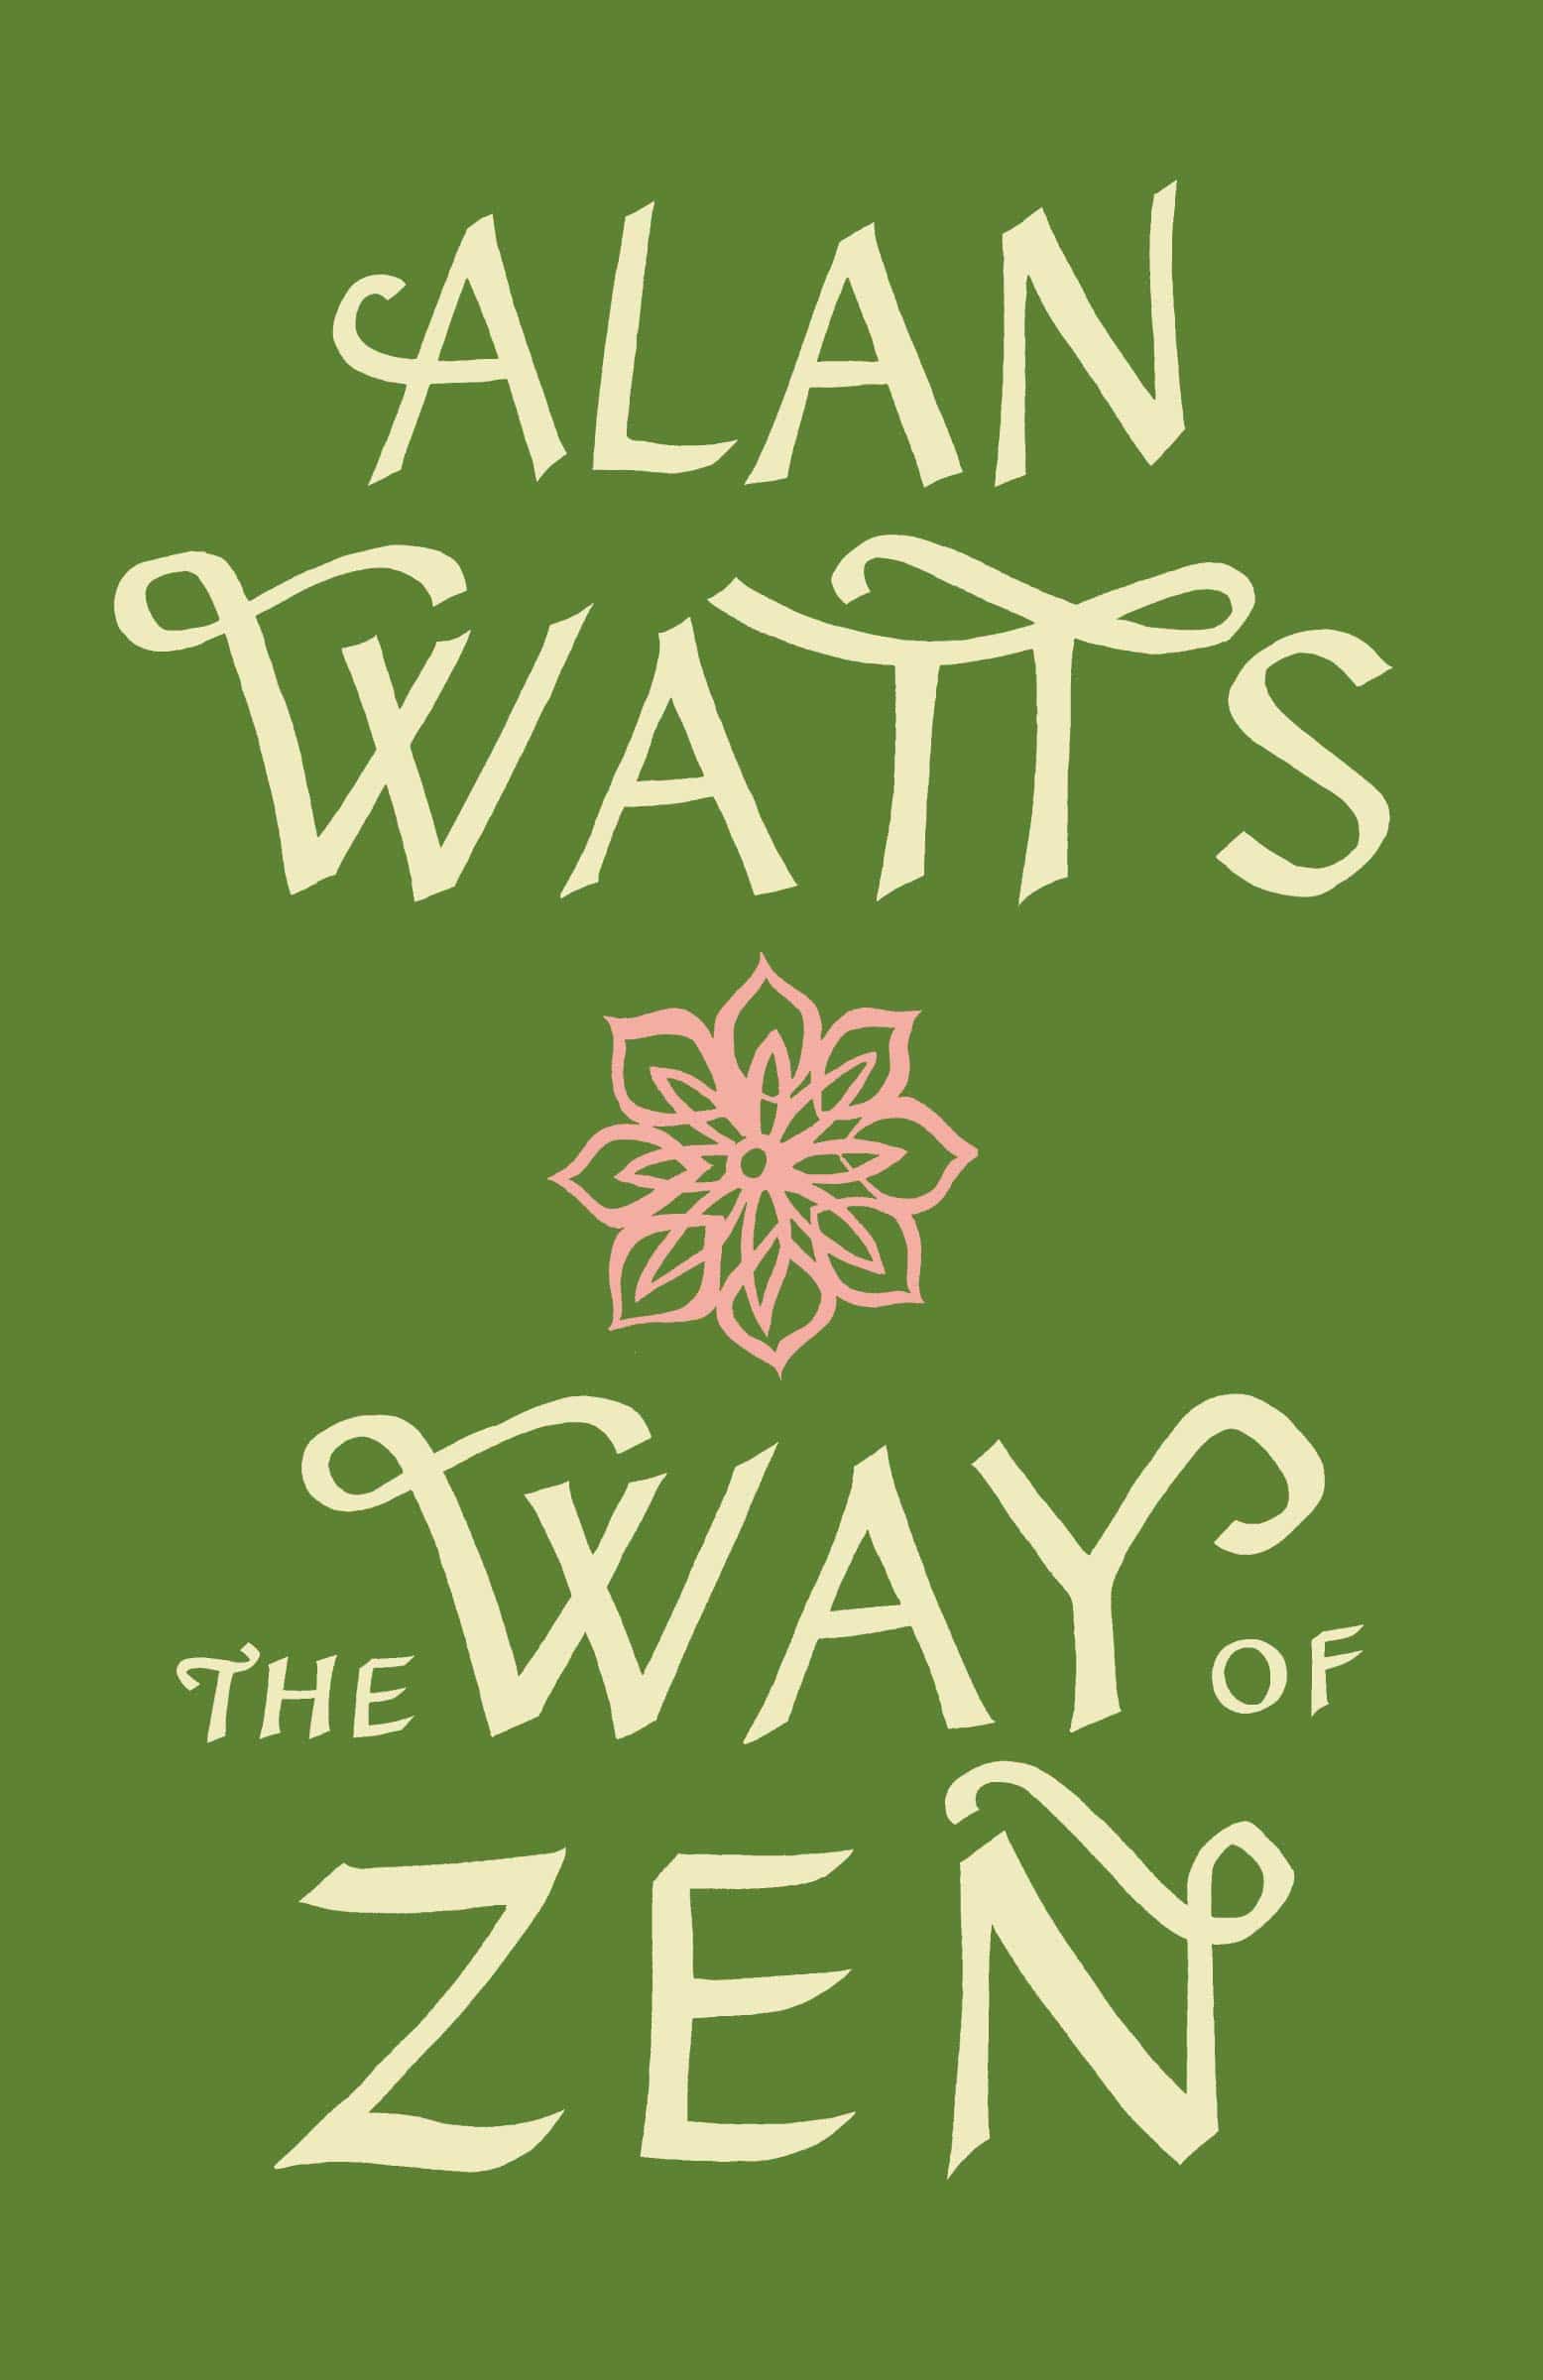 The cover of The Way of Zen